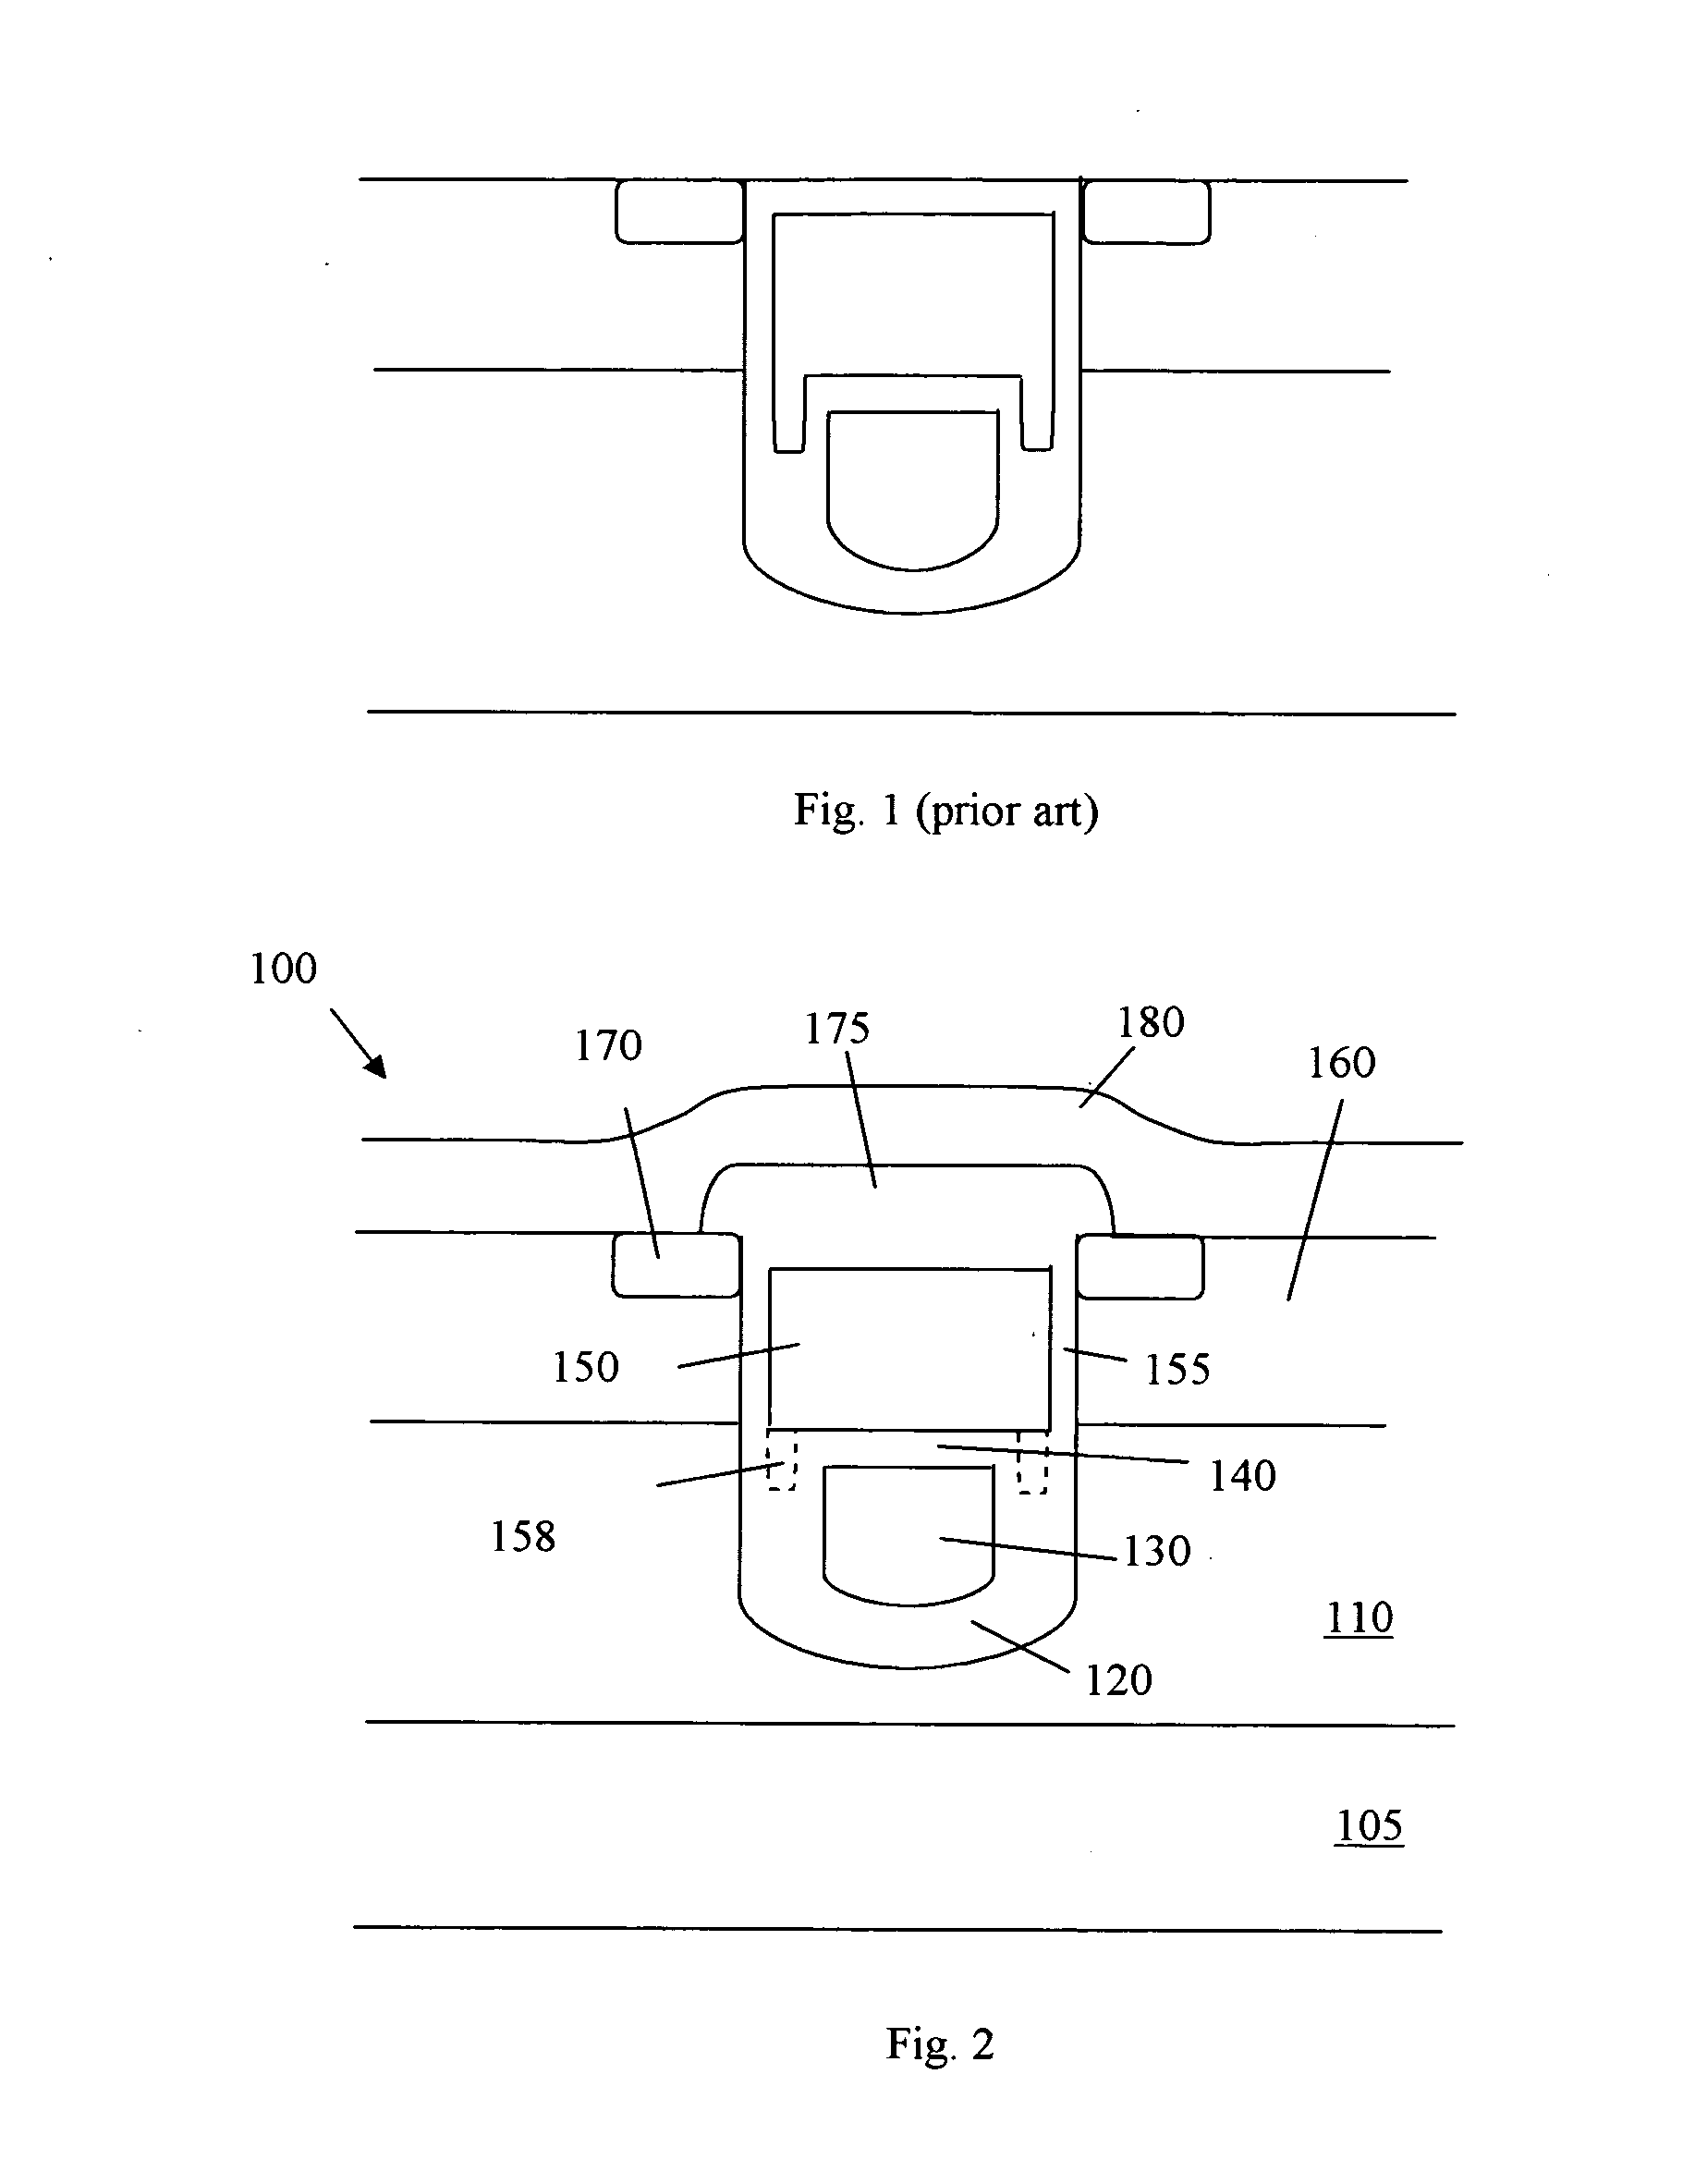 Method to manufacture split gate with high density plasma oxide layer as inter-polysilicon insulation layer